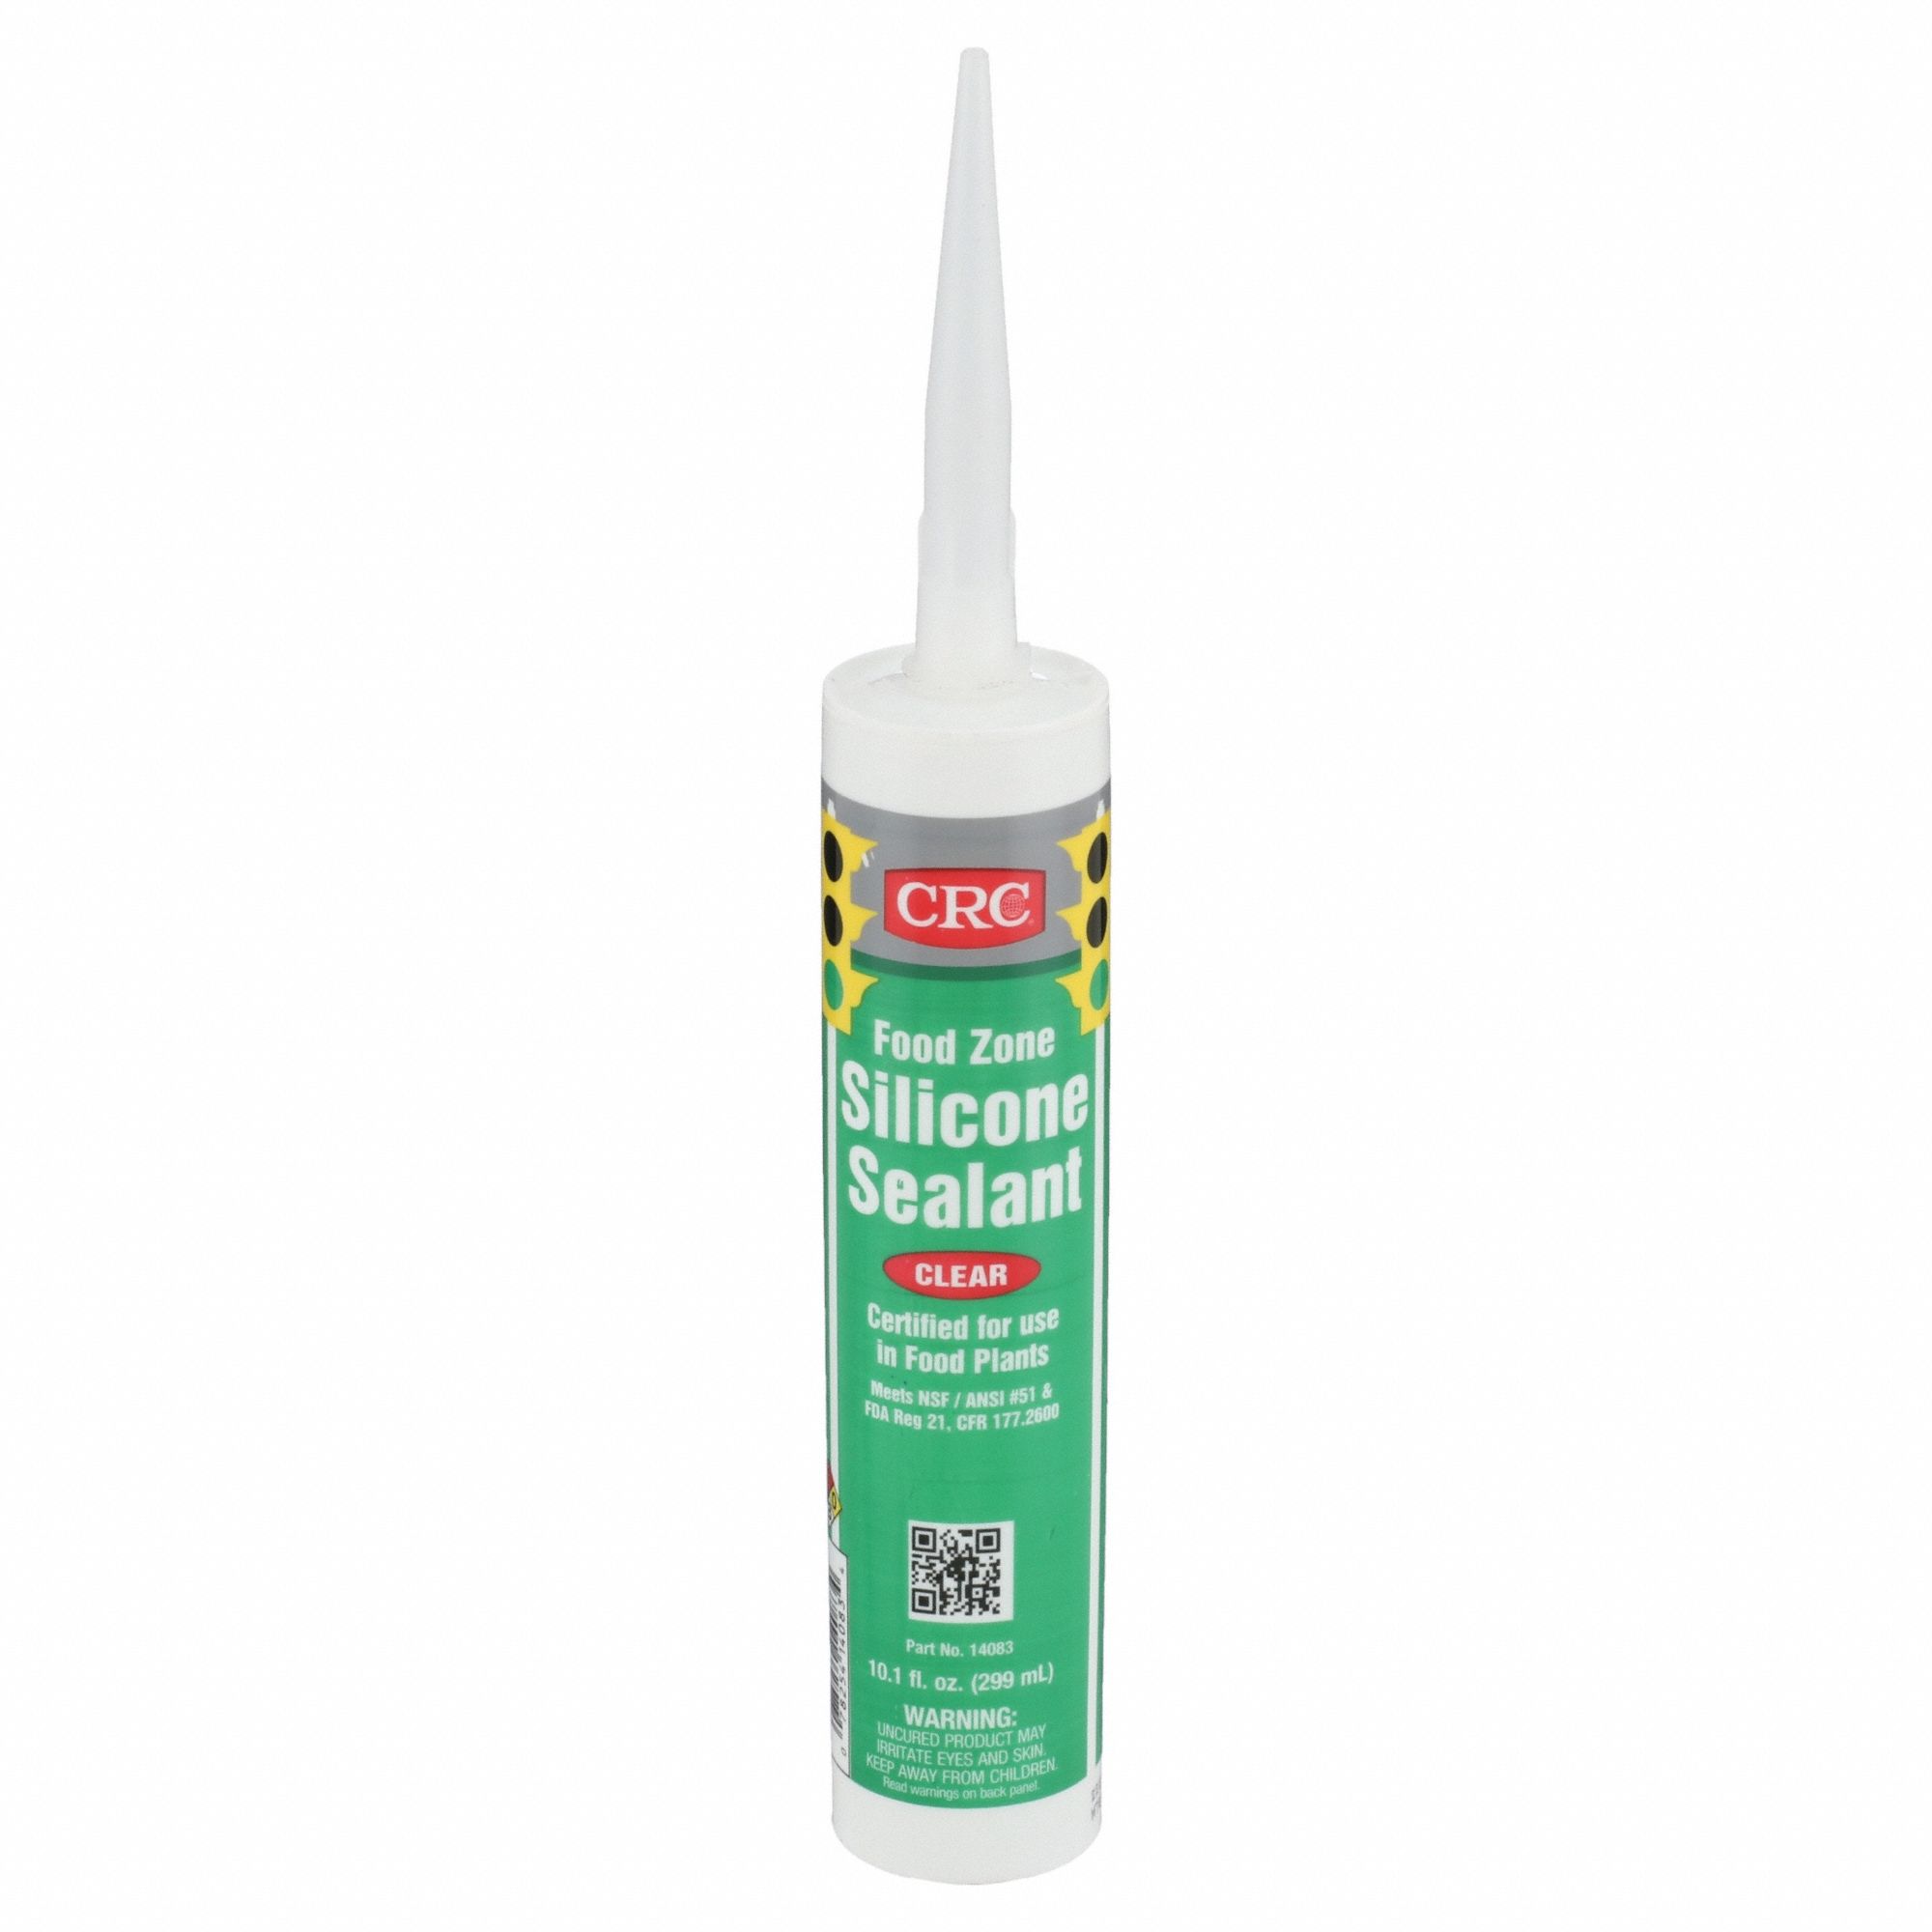 What is Food Grade Silicone Sealant?